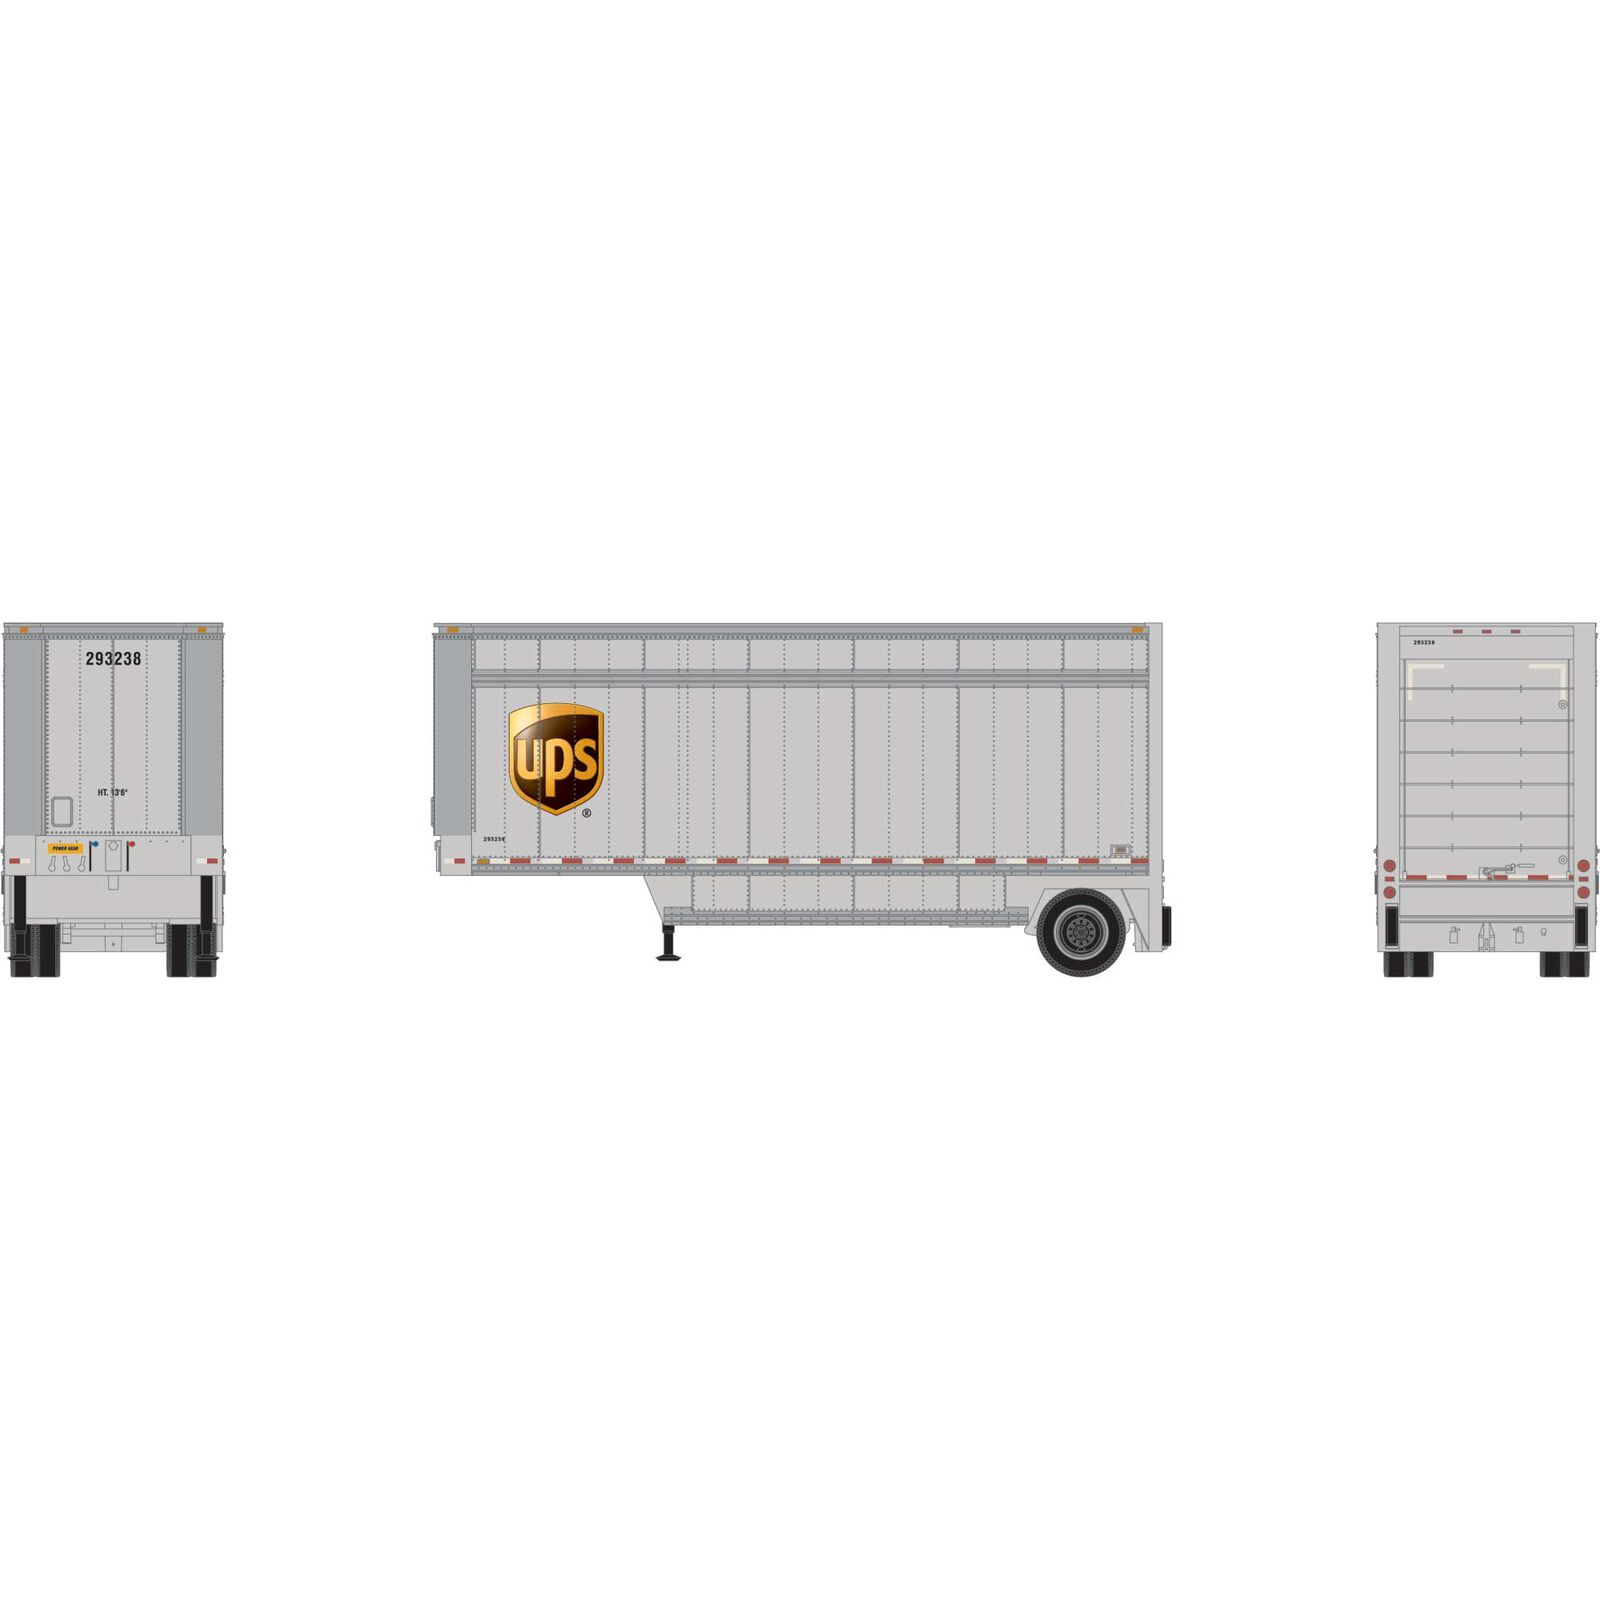 HO ATH 28' Parcel (PUP) Trailer, UPS with Shield #293238